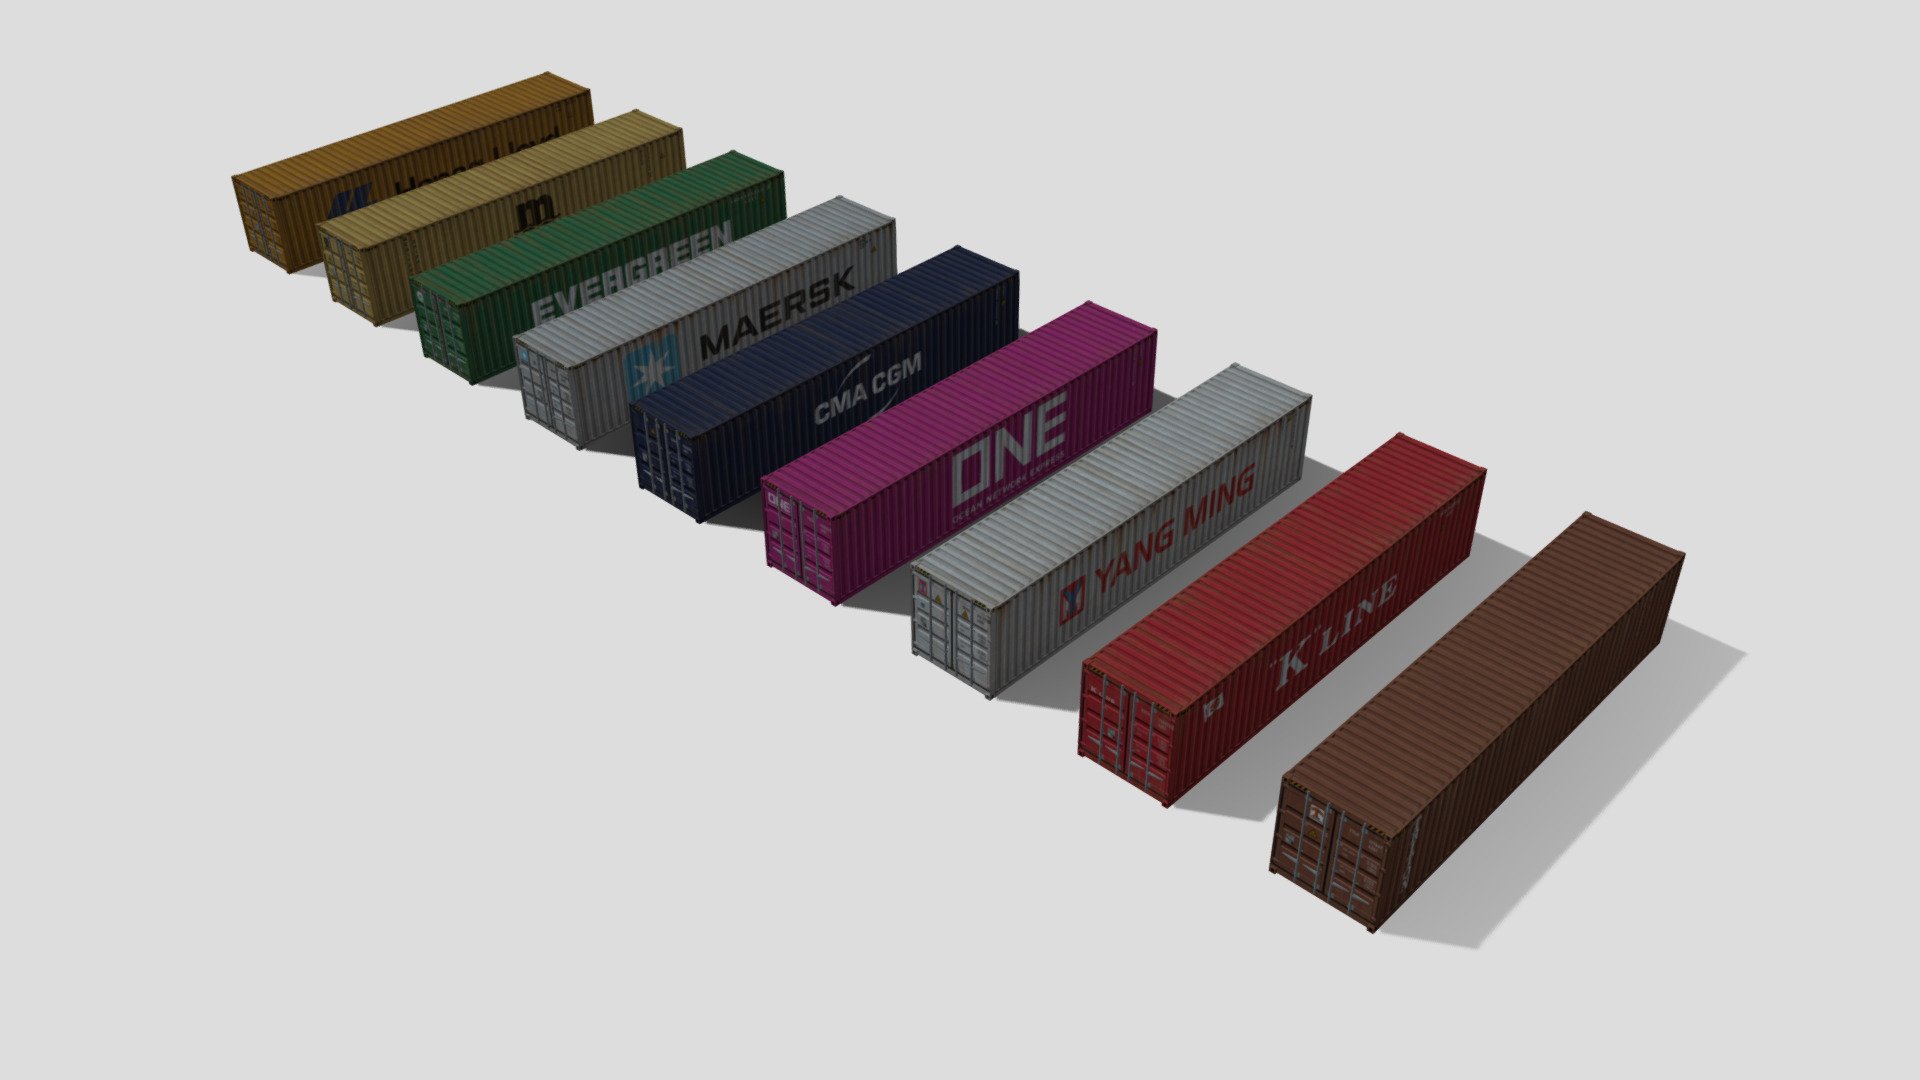 This is a pack containing nine real-life branded 40ft containers.

Container Brands: CMA CGM, Hapag Lloyd, Evergreen, MSC, Maersk, “K” Line, ONE, Triton, Yang Ming

This model was originally made as an asset for the game Cities: Skylines. There are some minor simplifications to the texture and model to keep it optimised for the game.

Available formats: Wavefront OBJ (.obj), Autodesk FBX (.fbx), STL (.stl)

Polygon count: 990 Vertex count: 1,512

Model made in Blender 3.0 - 40ft Containers - Buy Royalty Free 3D model by Nostrix 3d model